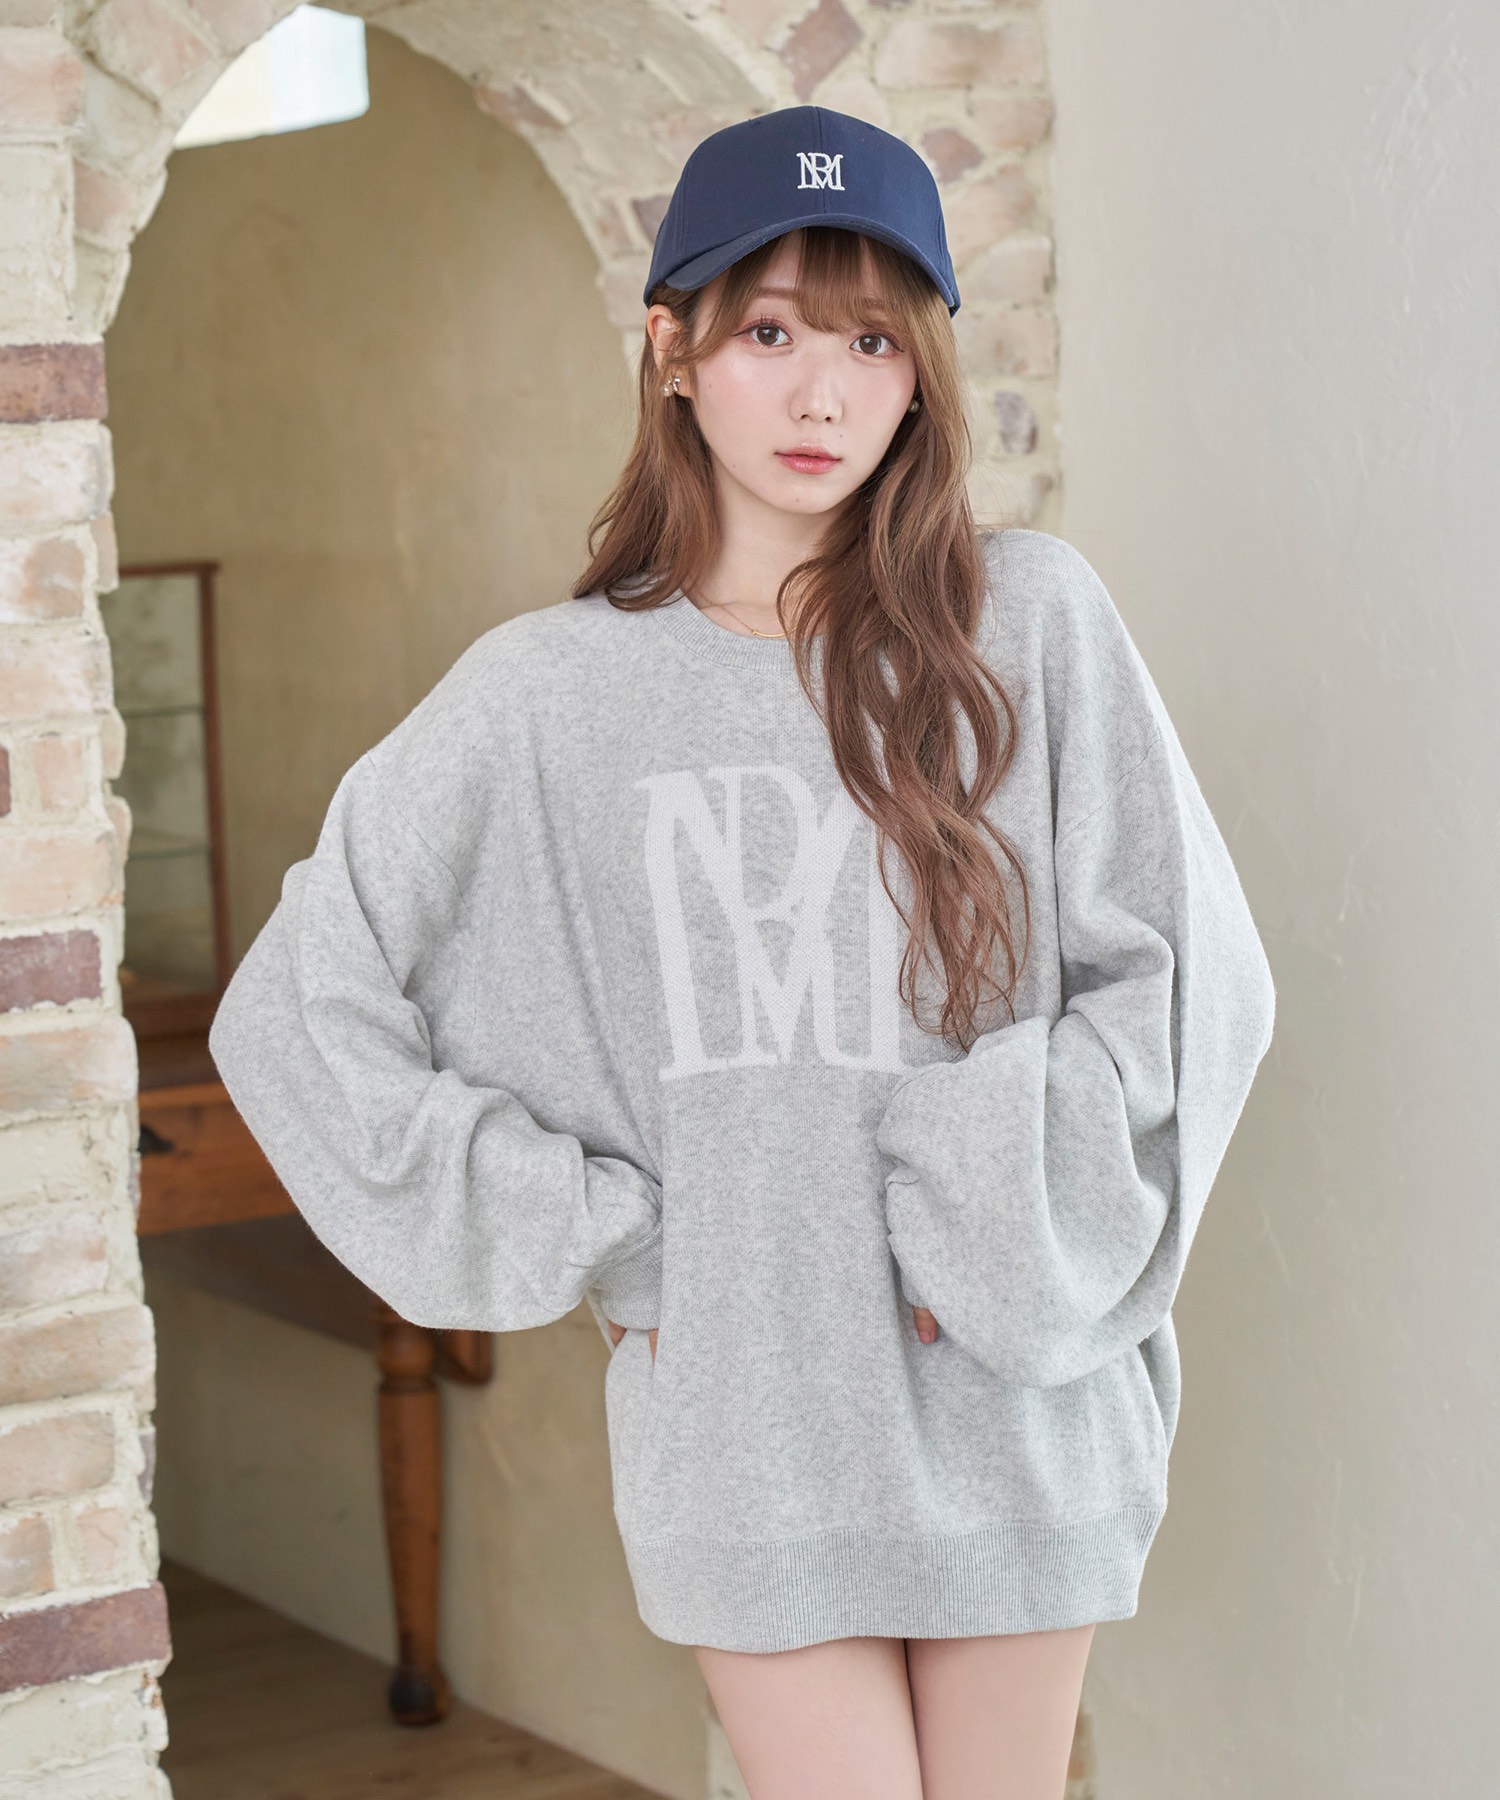 Rosé Muse RM logo knit_L size【navy】ロゼミューズ